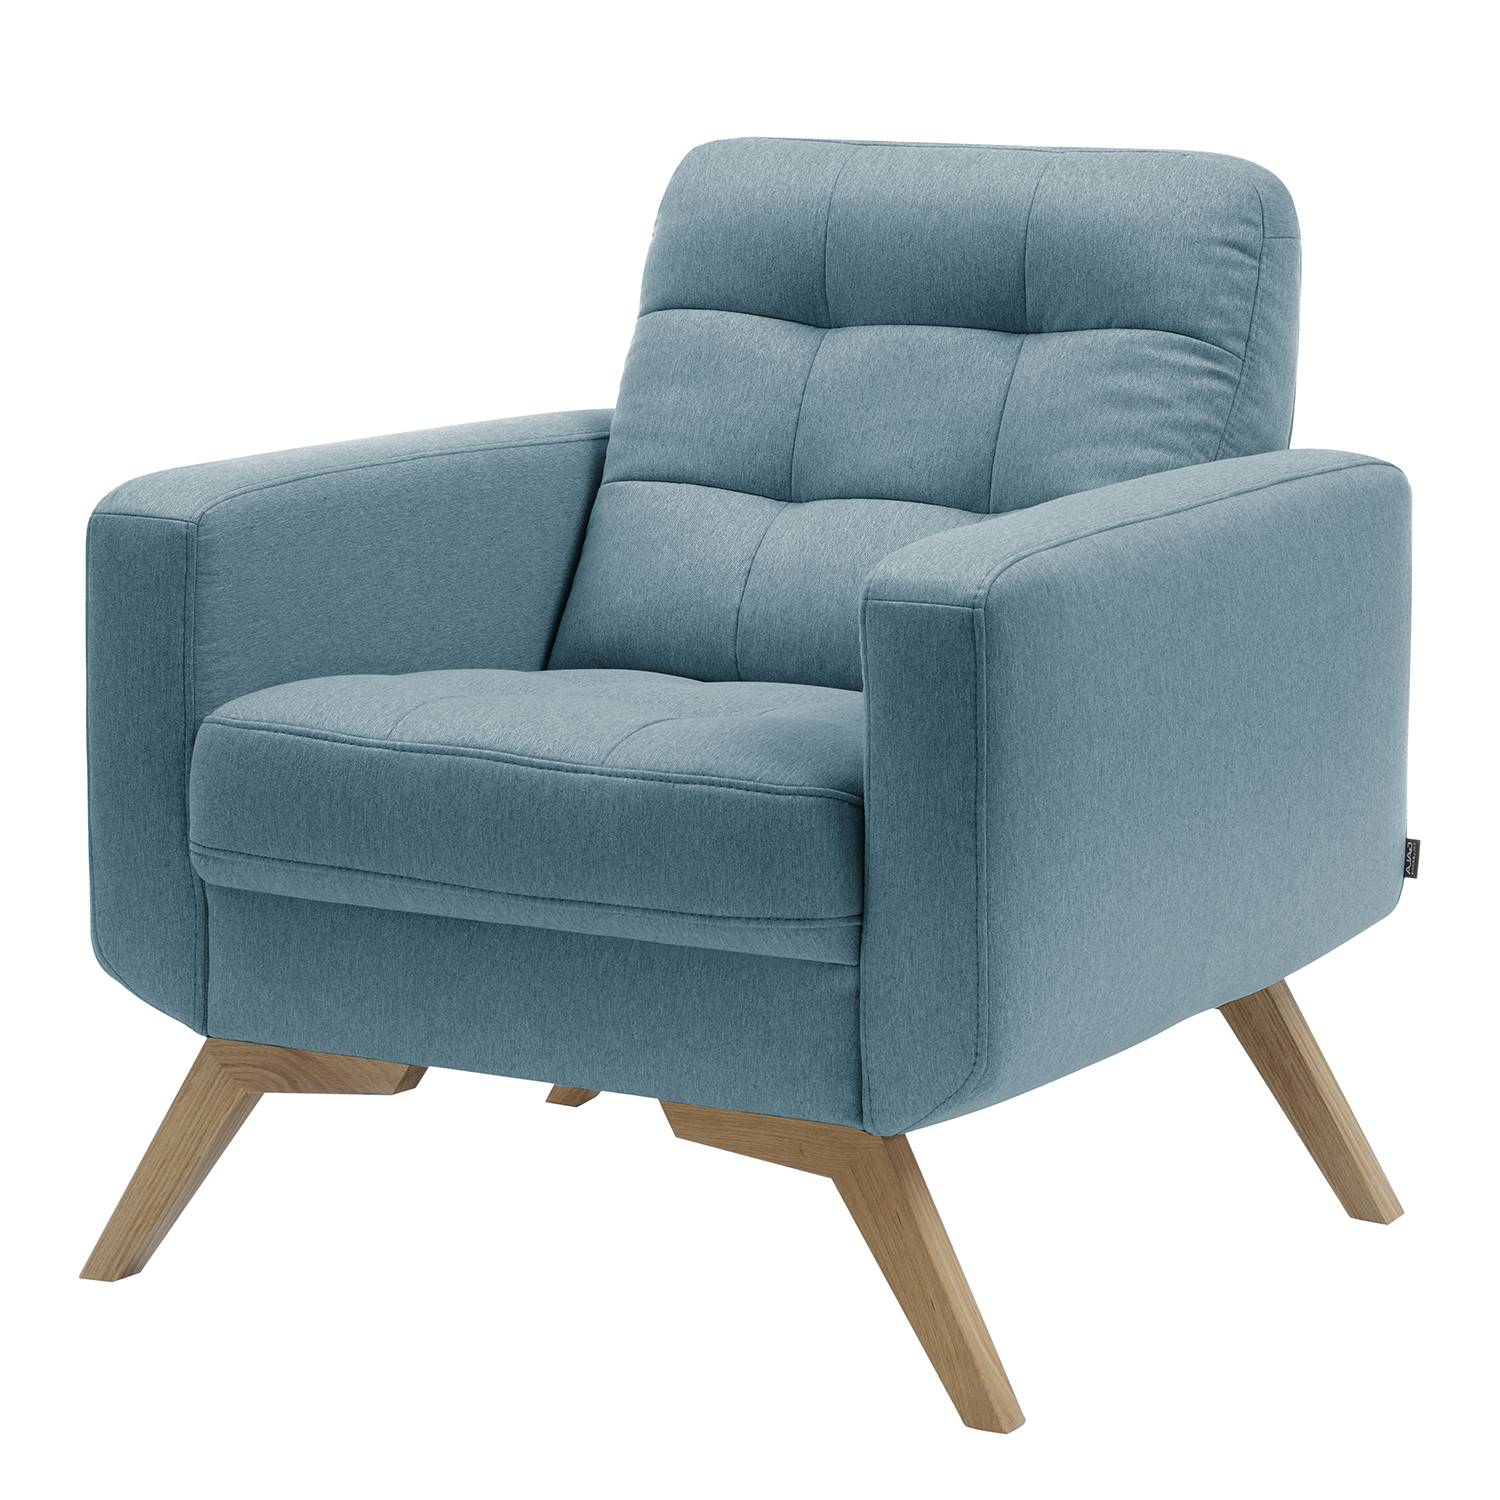 Image of Fauteuil Somoto 000000001000128309